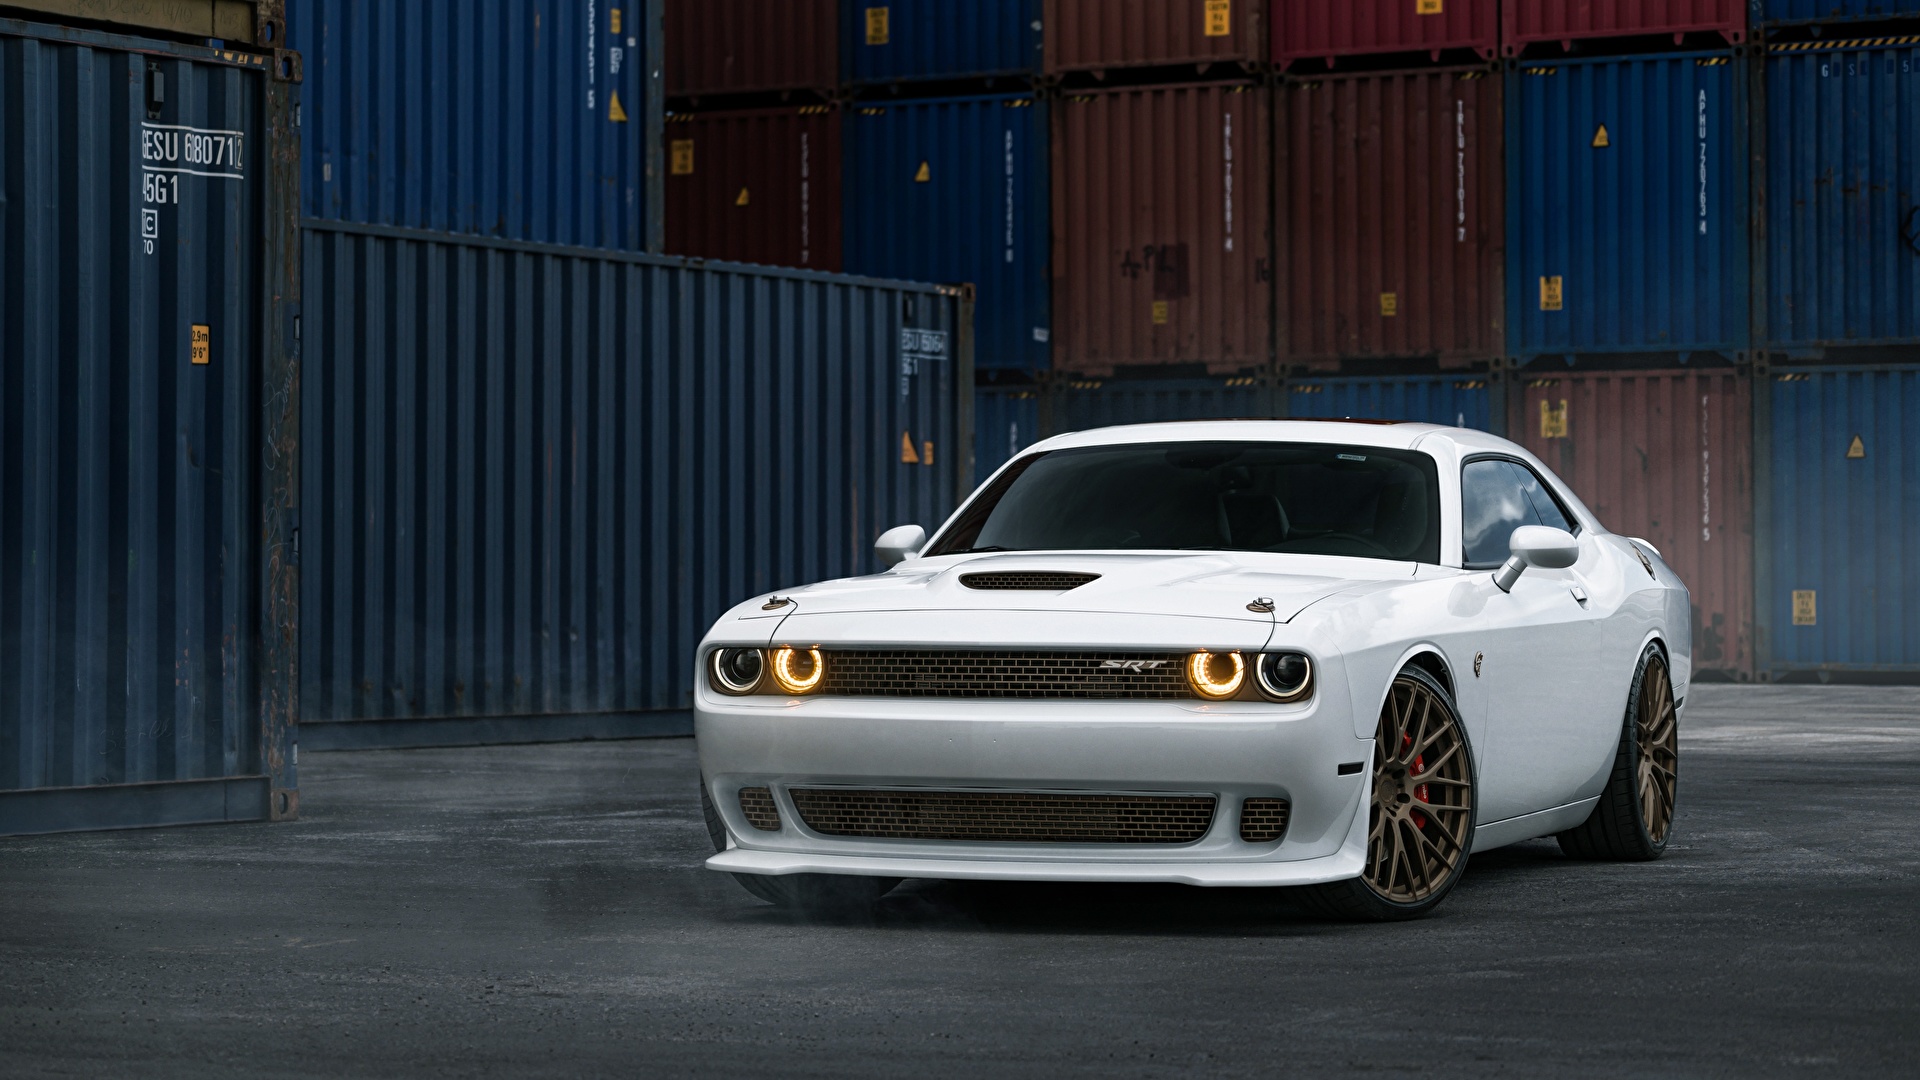 Container Dodge Challenger Srt Muscle Car White Car 1920x1080